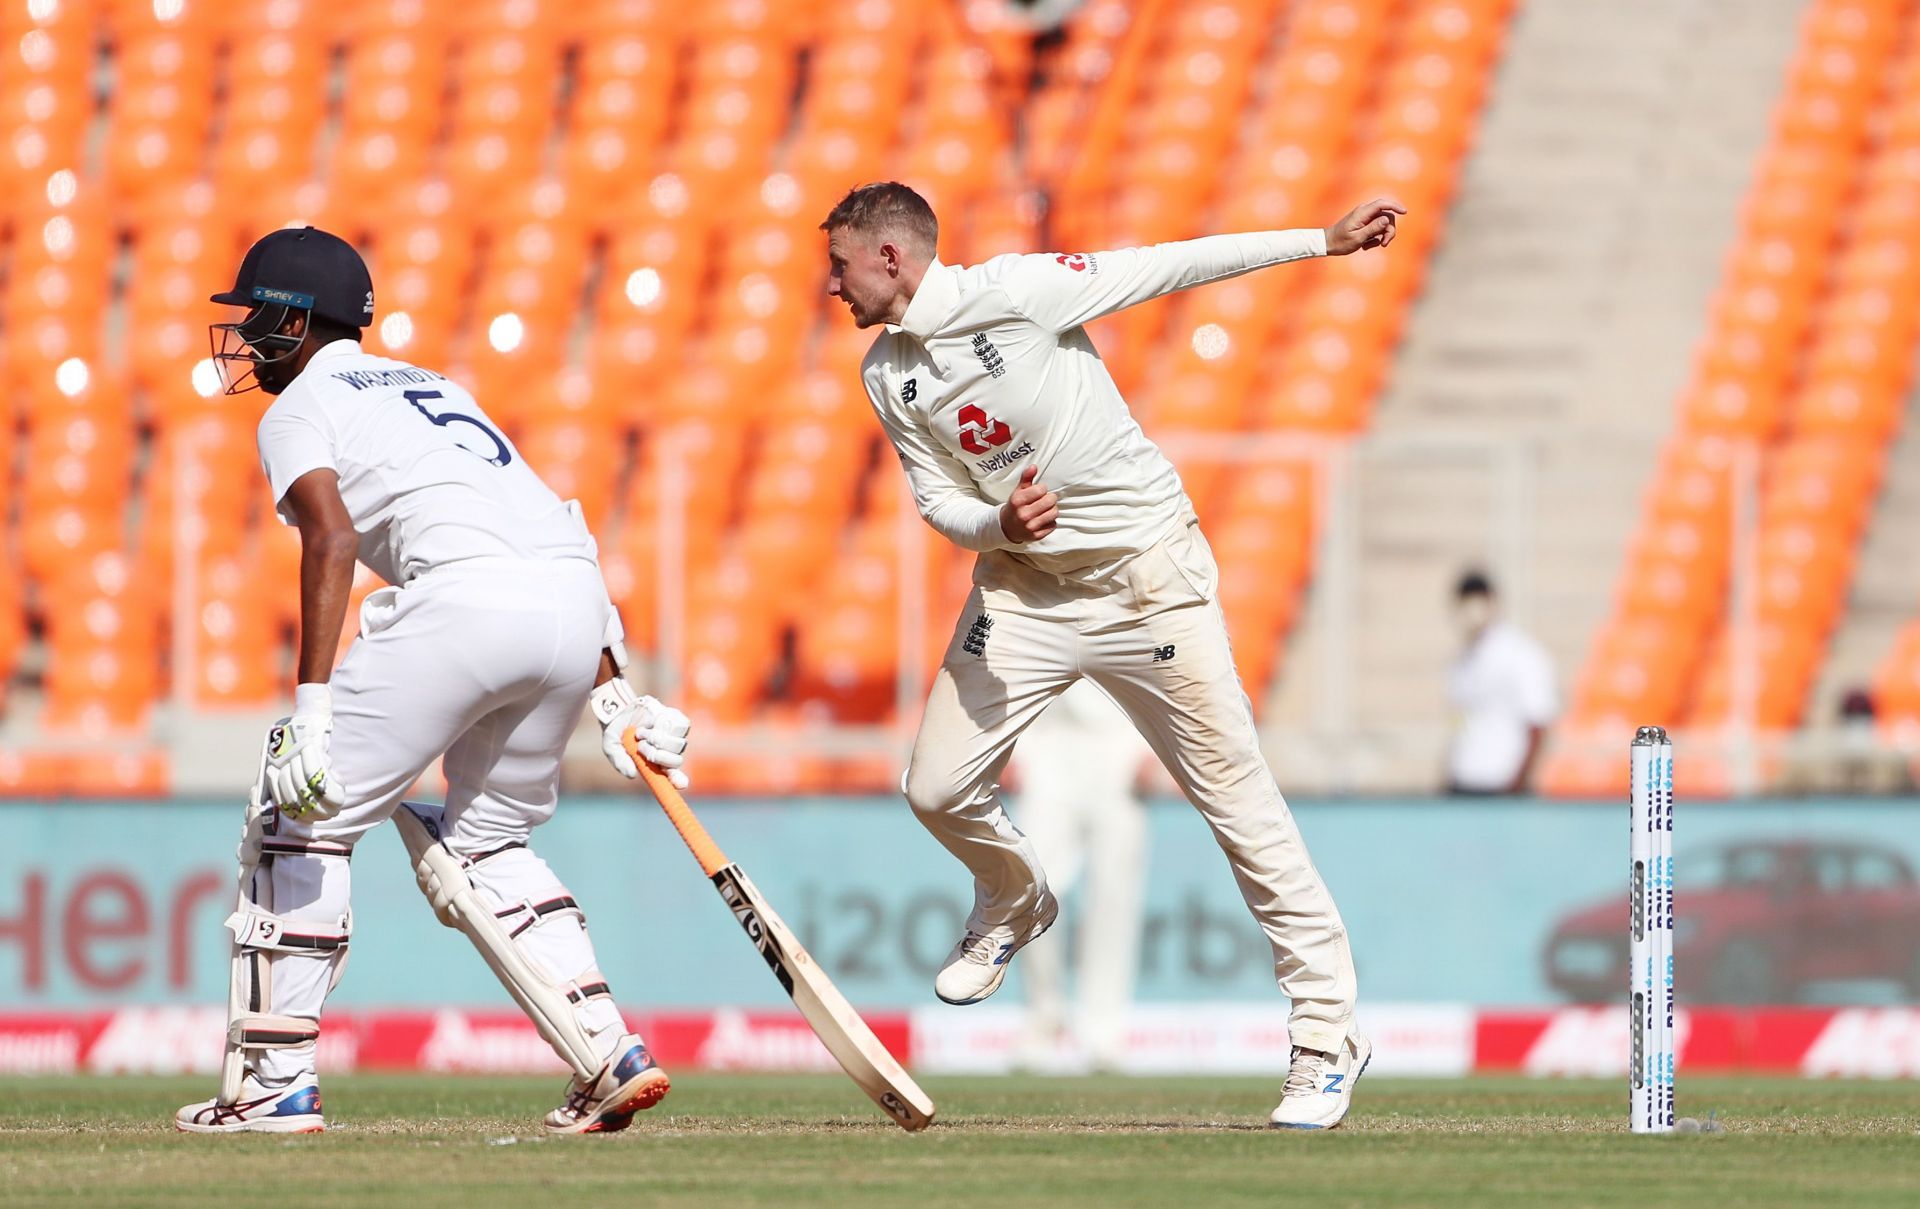 The off-spinner in action during the 2021 Ahmedabad Test. (Pic: Getty Images)